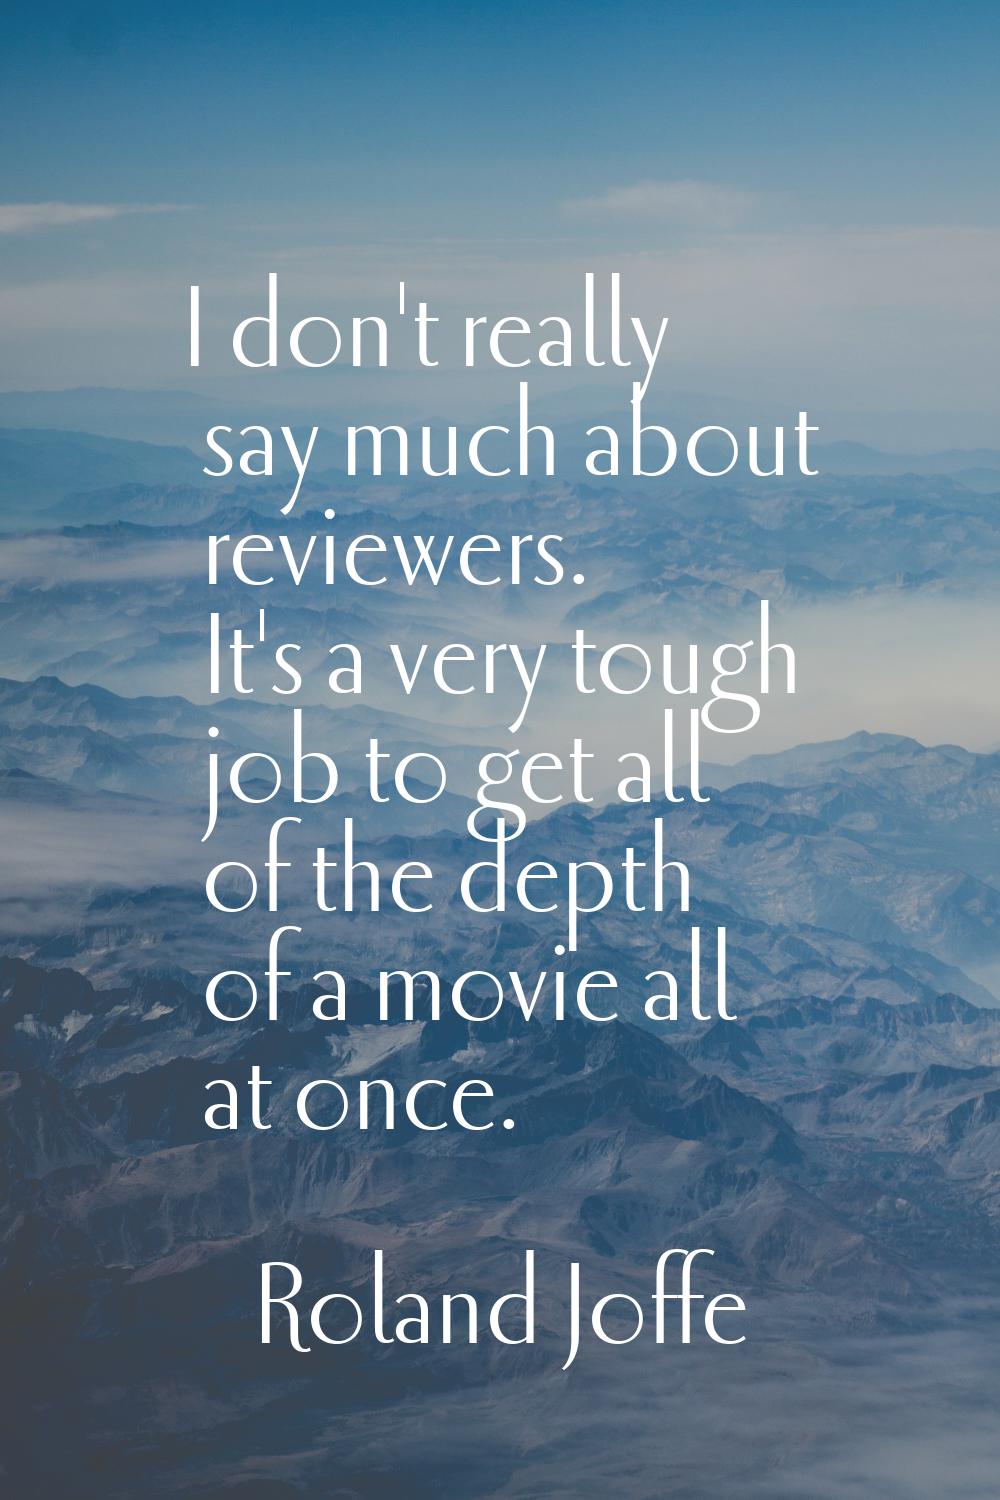 I don't really say much about reviewers. It's a very tough job to get all of the depth of a movie a